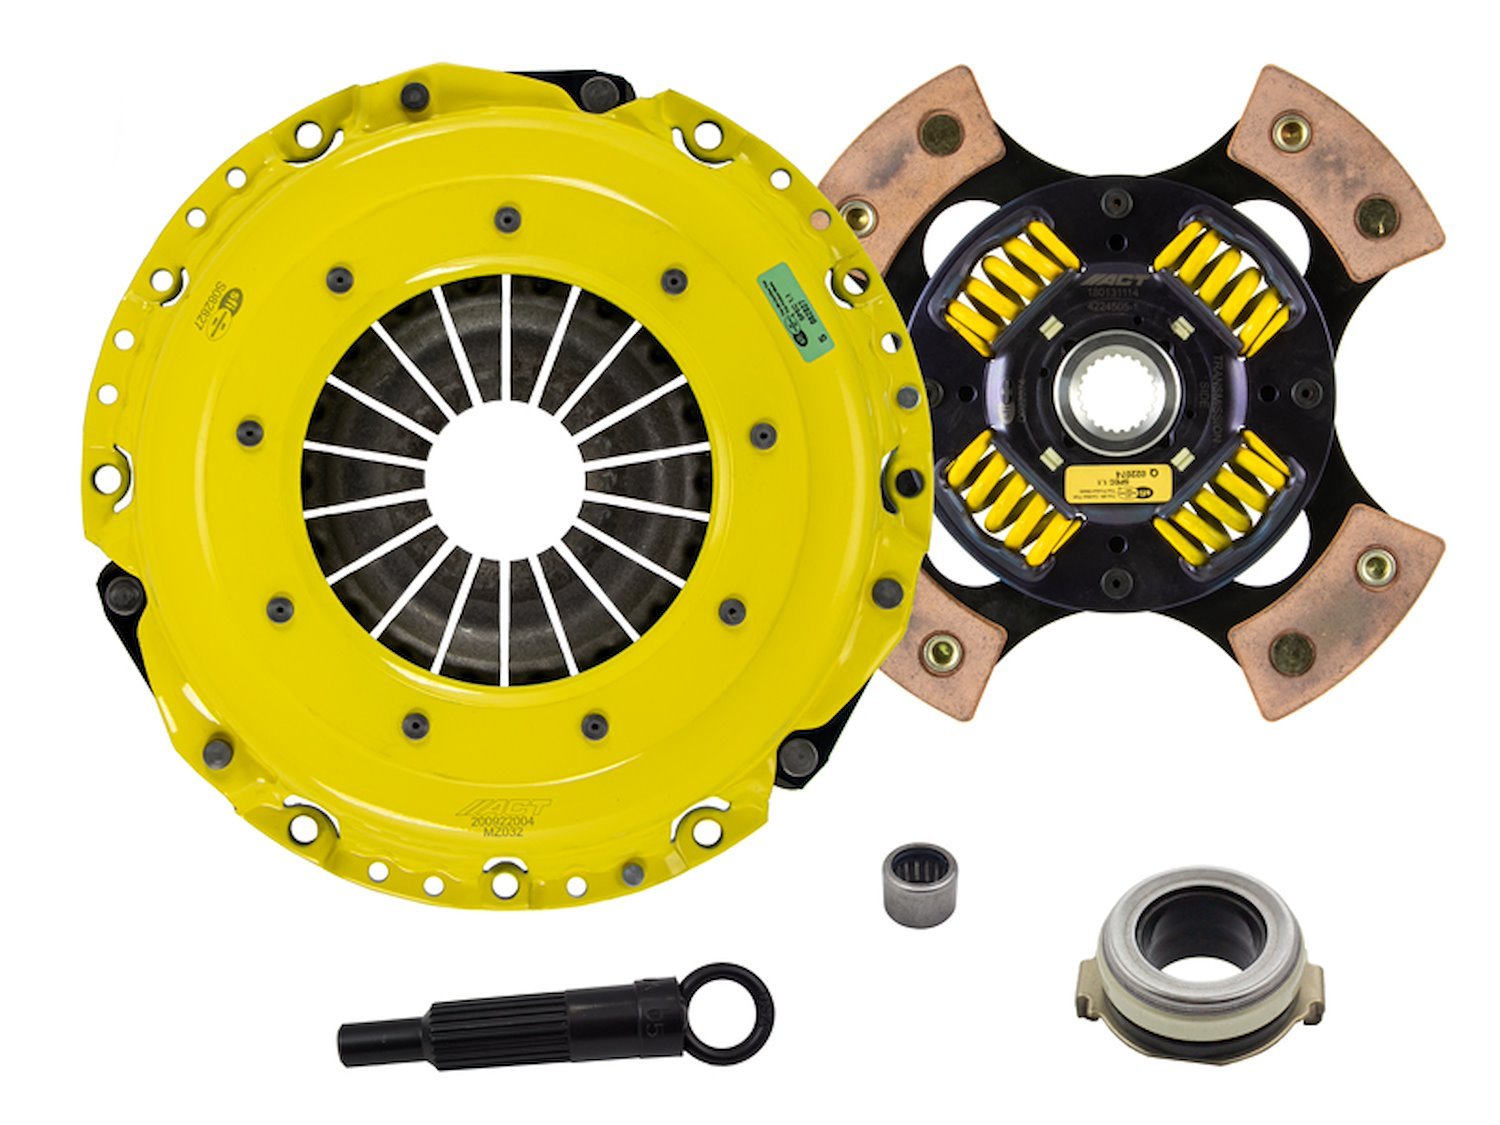 HD/Race Sprung 4-Pad Transmission Clutch Kit Fits Select Ford/Lincoln/Mercury/Mazda